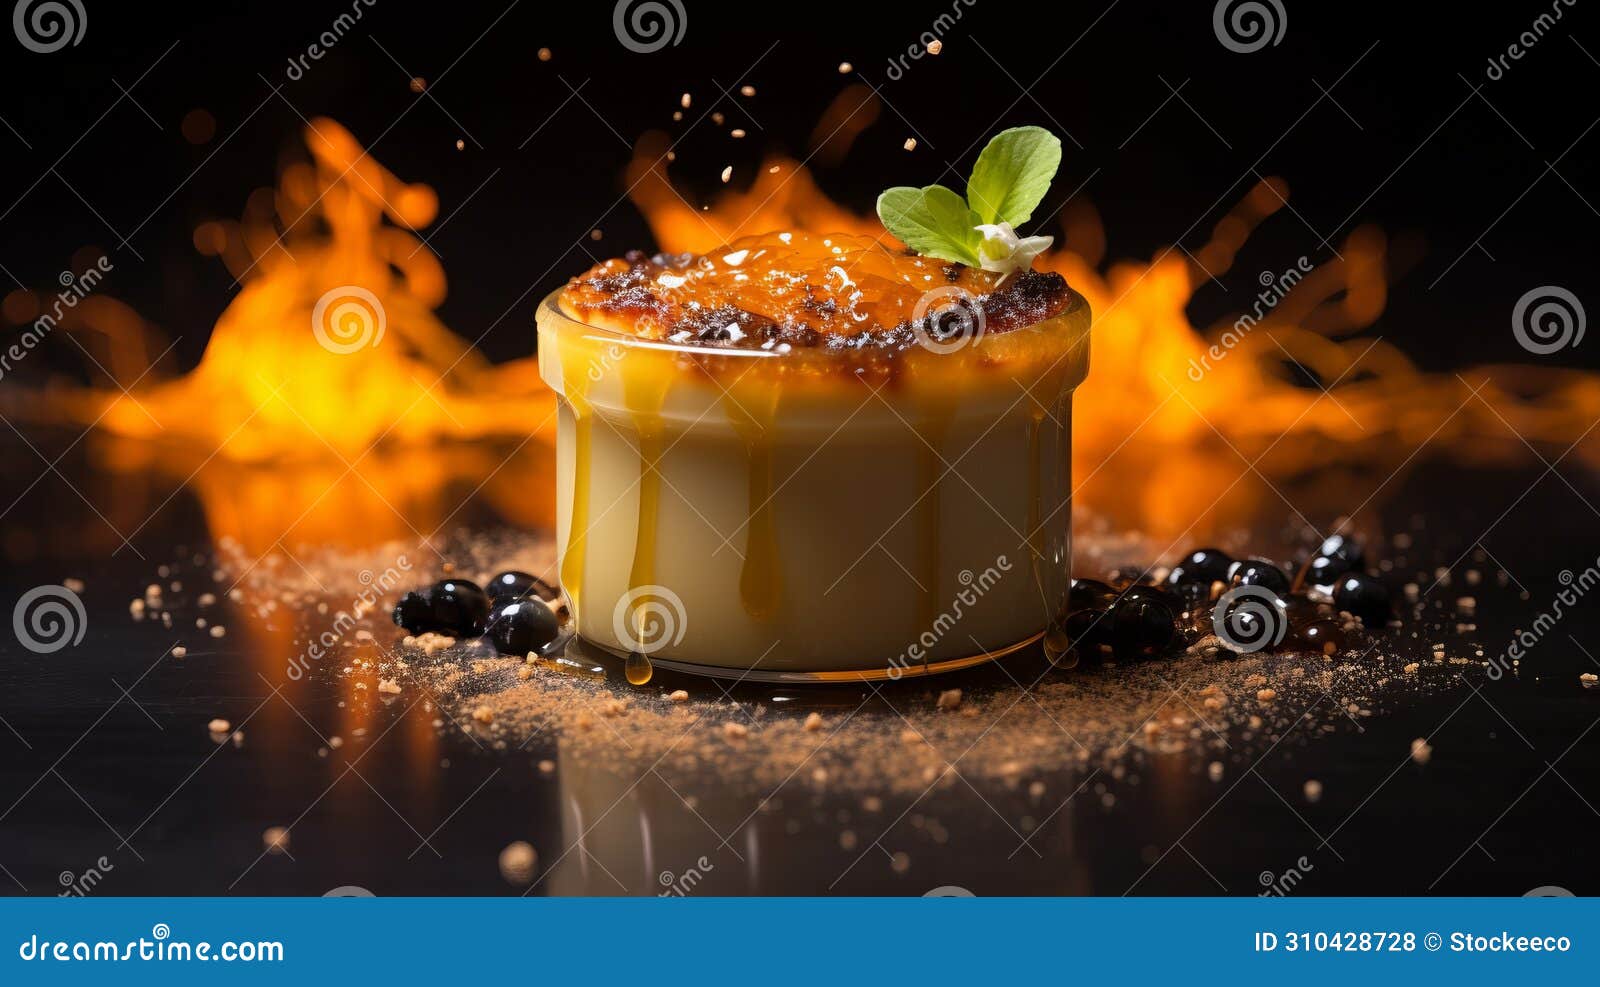 immersive creme brulee image inspired by olivier ledroit, miki asai, and herve guibert